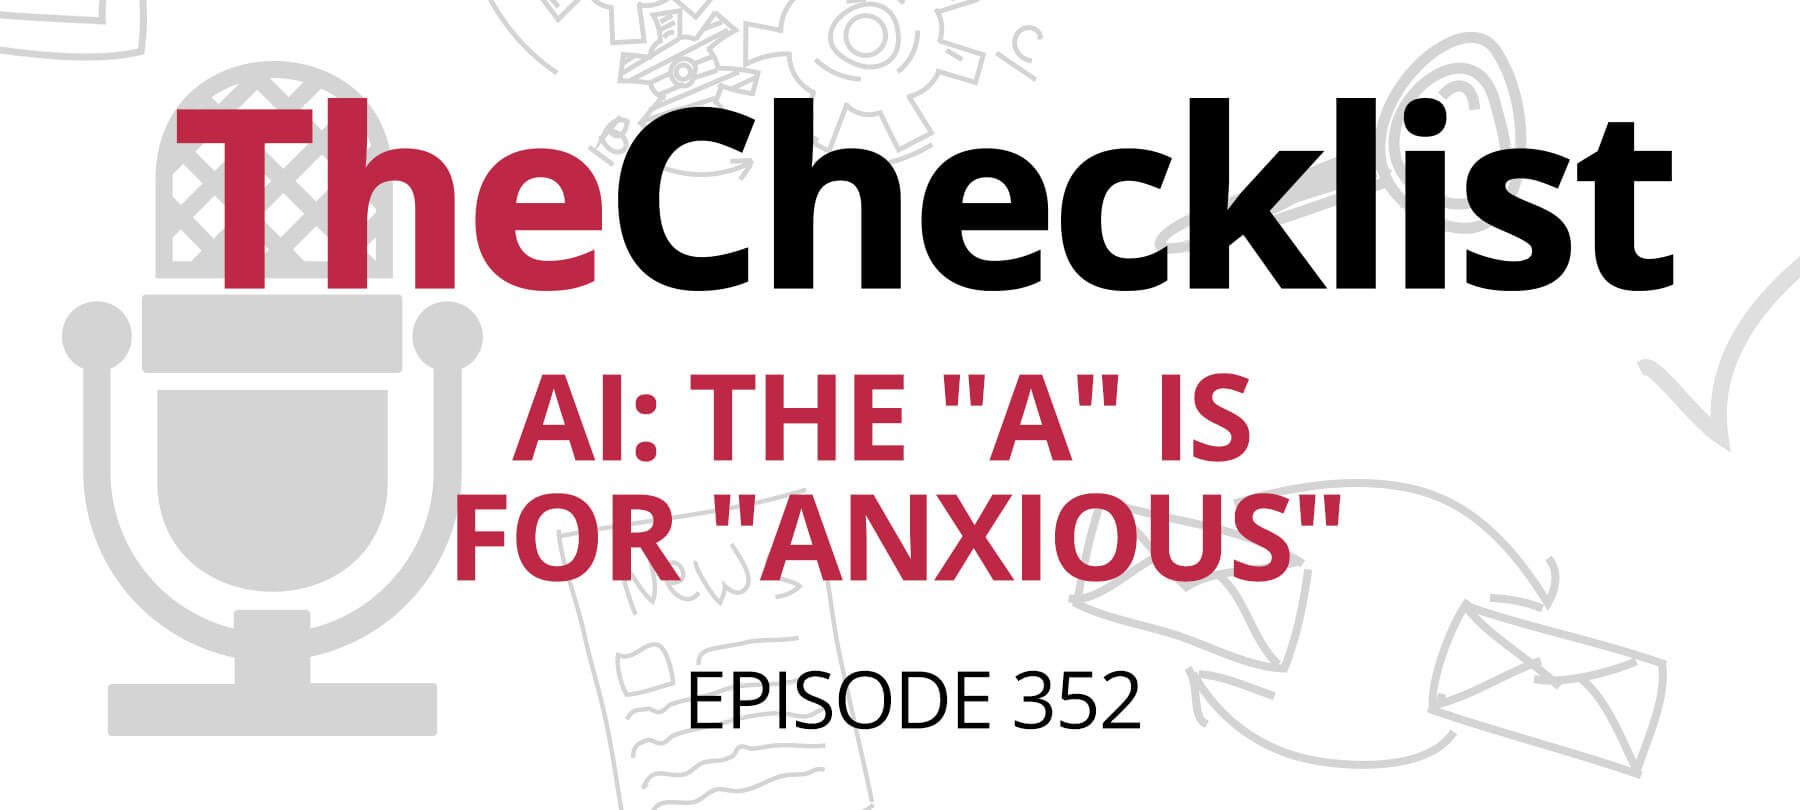 Checklist 352 cover: AI: The "A" is for "Anxious"